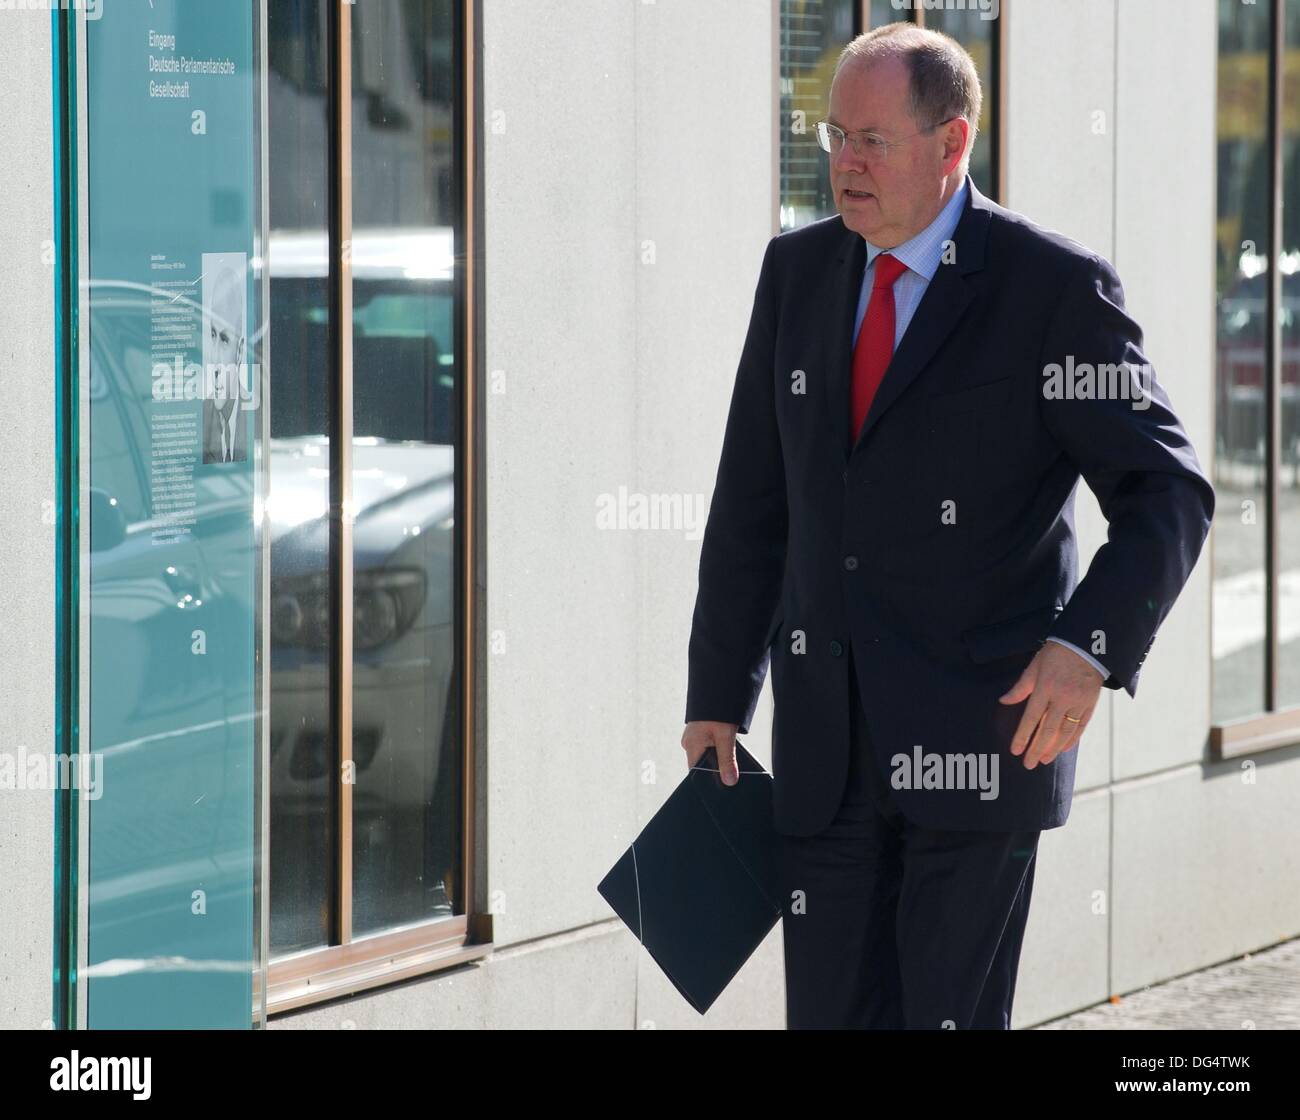 Berlin, Germany. 14th Oct, 2013. Former top candidate of the SPD, Peer Steinbrueck, arrives at the Bundestag for exploratory coalition talks between the SPD and the CDU/CSU in Berlin, Germany, 14 October 2013. Photo: TIM BRAKEMEIER/dpa/Alamy Live News Stock Photo